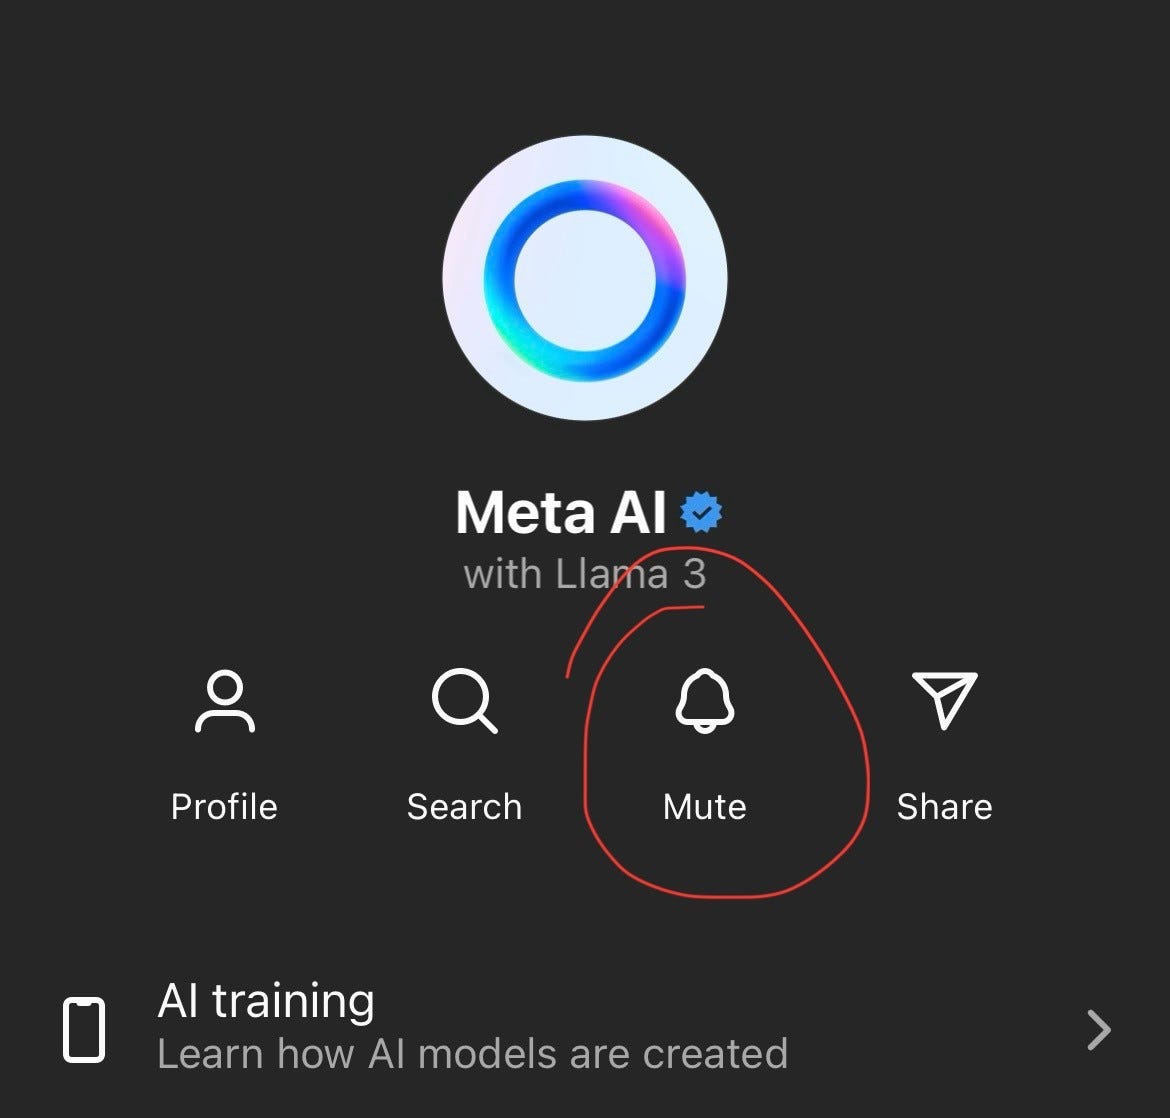 want to turn off the meta ai chat on facebook, instagram? take these easy steps to mute it